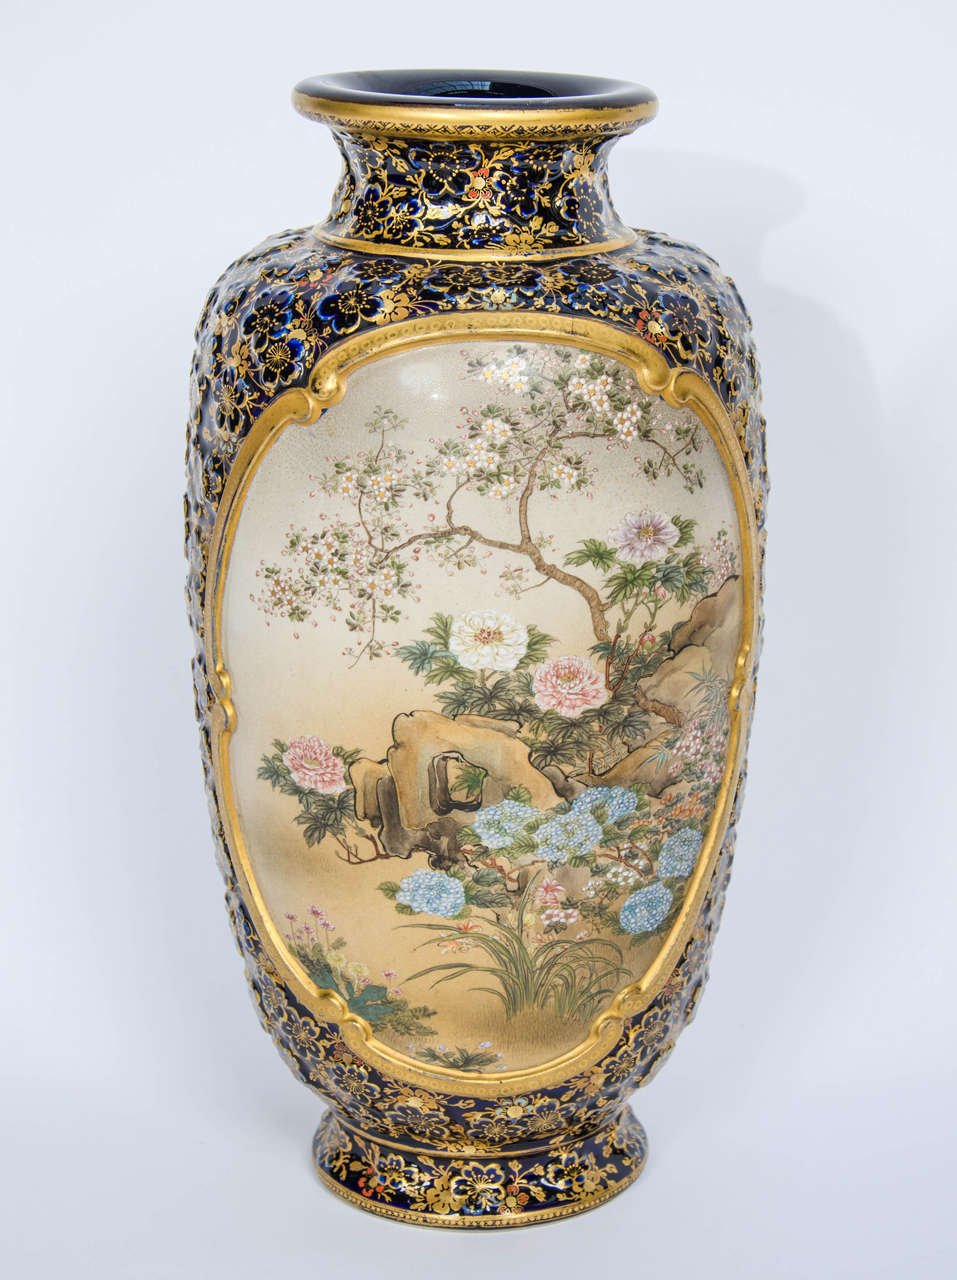 A beautifully executed Japanese Satsuma vase by Kinkozan.
Depicting panels of Japanese flowers, bamboo and chickens.
Kinkozan was a well-known studio operating in Kyoto during the late Meiji period (1868-1912).